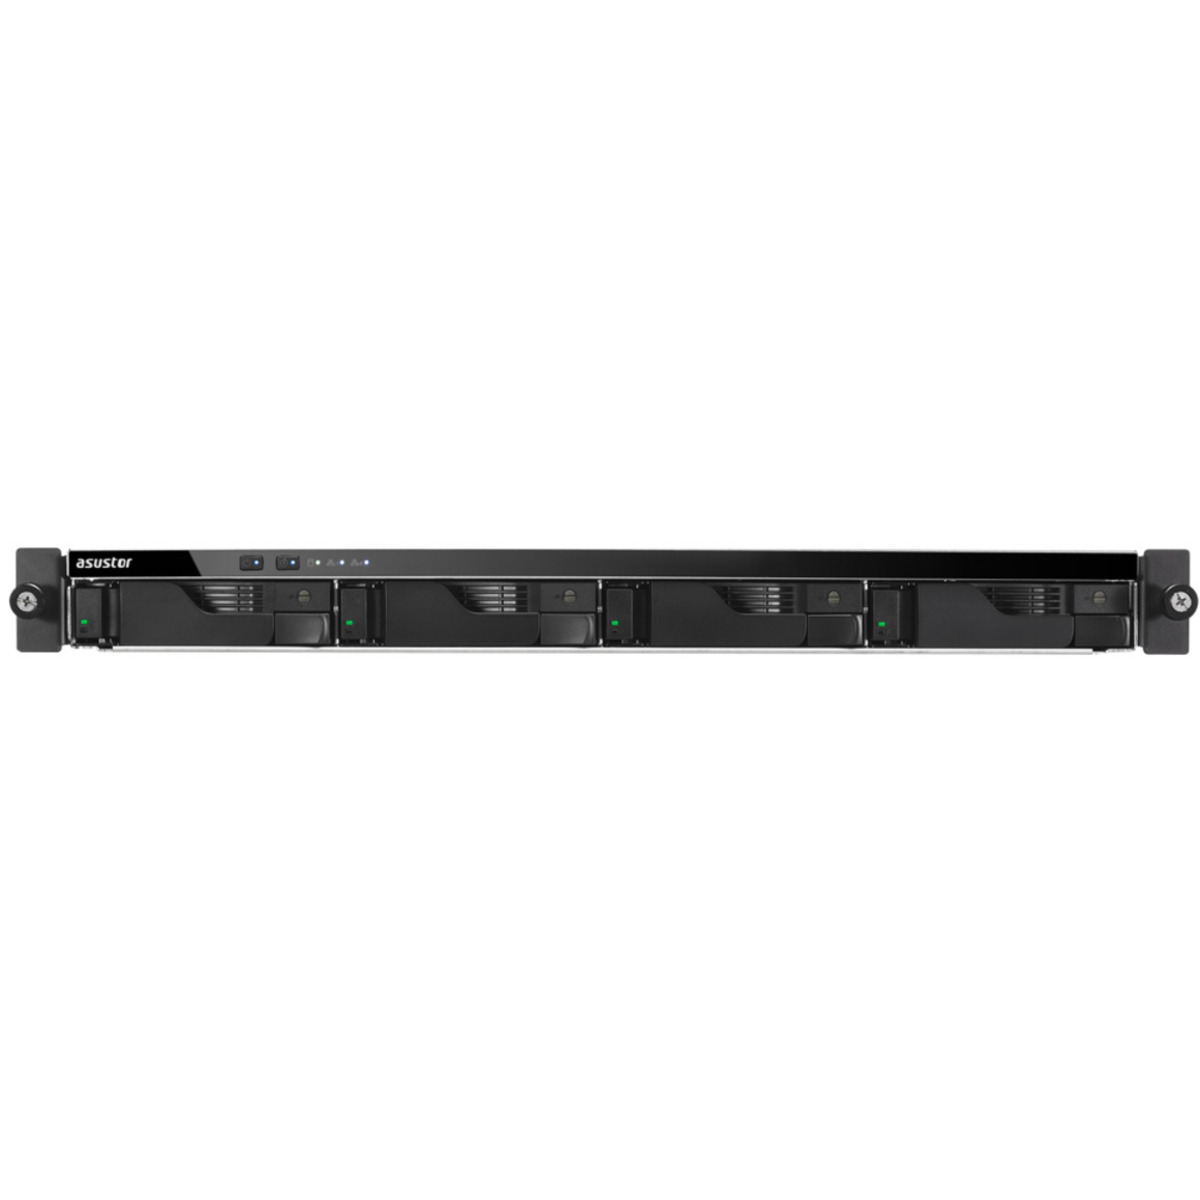 ASUSTOR LOCKERSTOR 4RD AS6504RD 32tb 4-Bay RackMount Multimedia / Power User / Business NAS - Network Attached Storage Device 4x8tb Western Digital Gold WD8005FRYZ 3.5 7200rpm SATA 6Gb/s HDD ENTERPRISE Class Drives Installed - Burn-In Tested - FREE RAM UPGRADE LOCKERSTOR 4RD AS6504RD